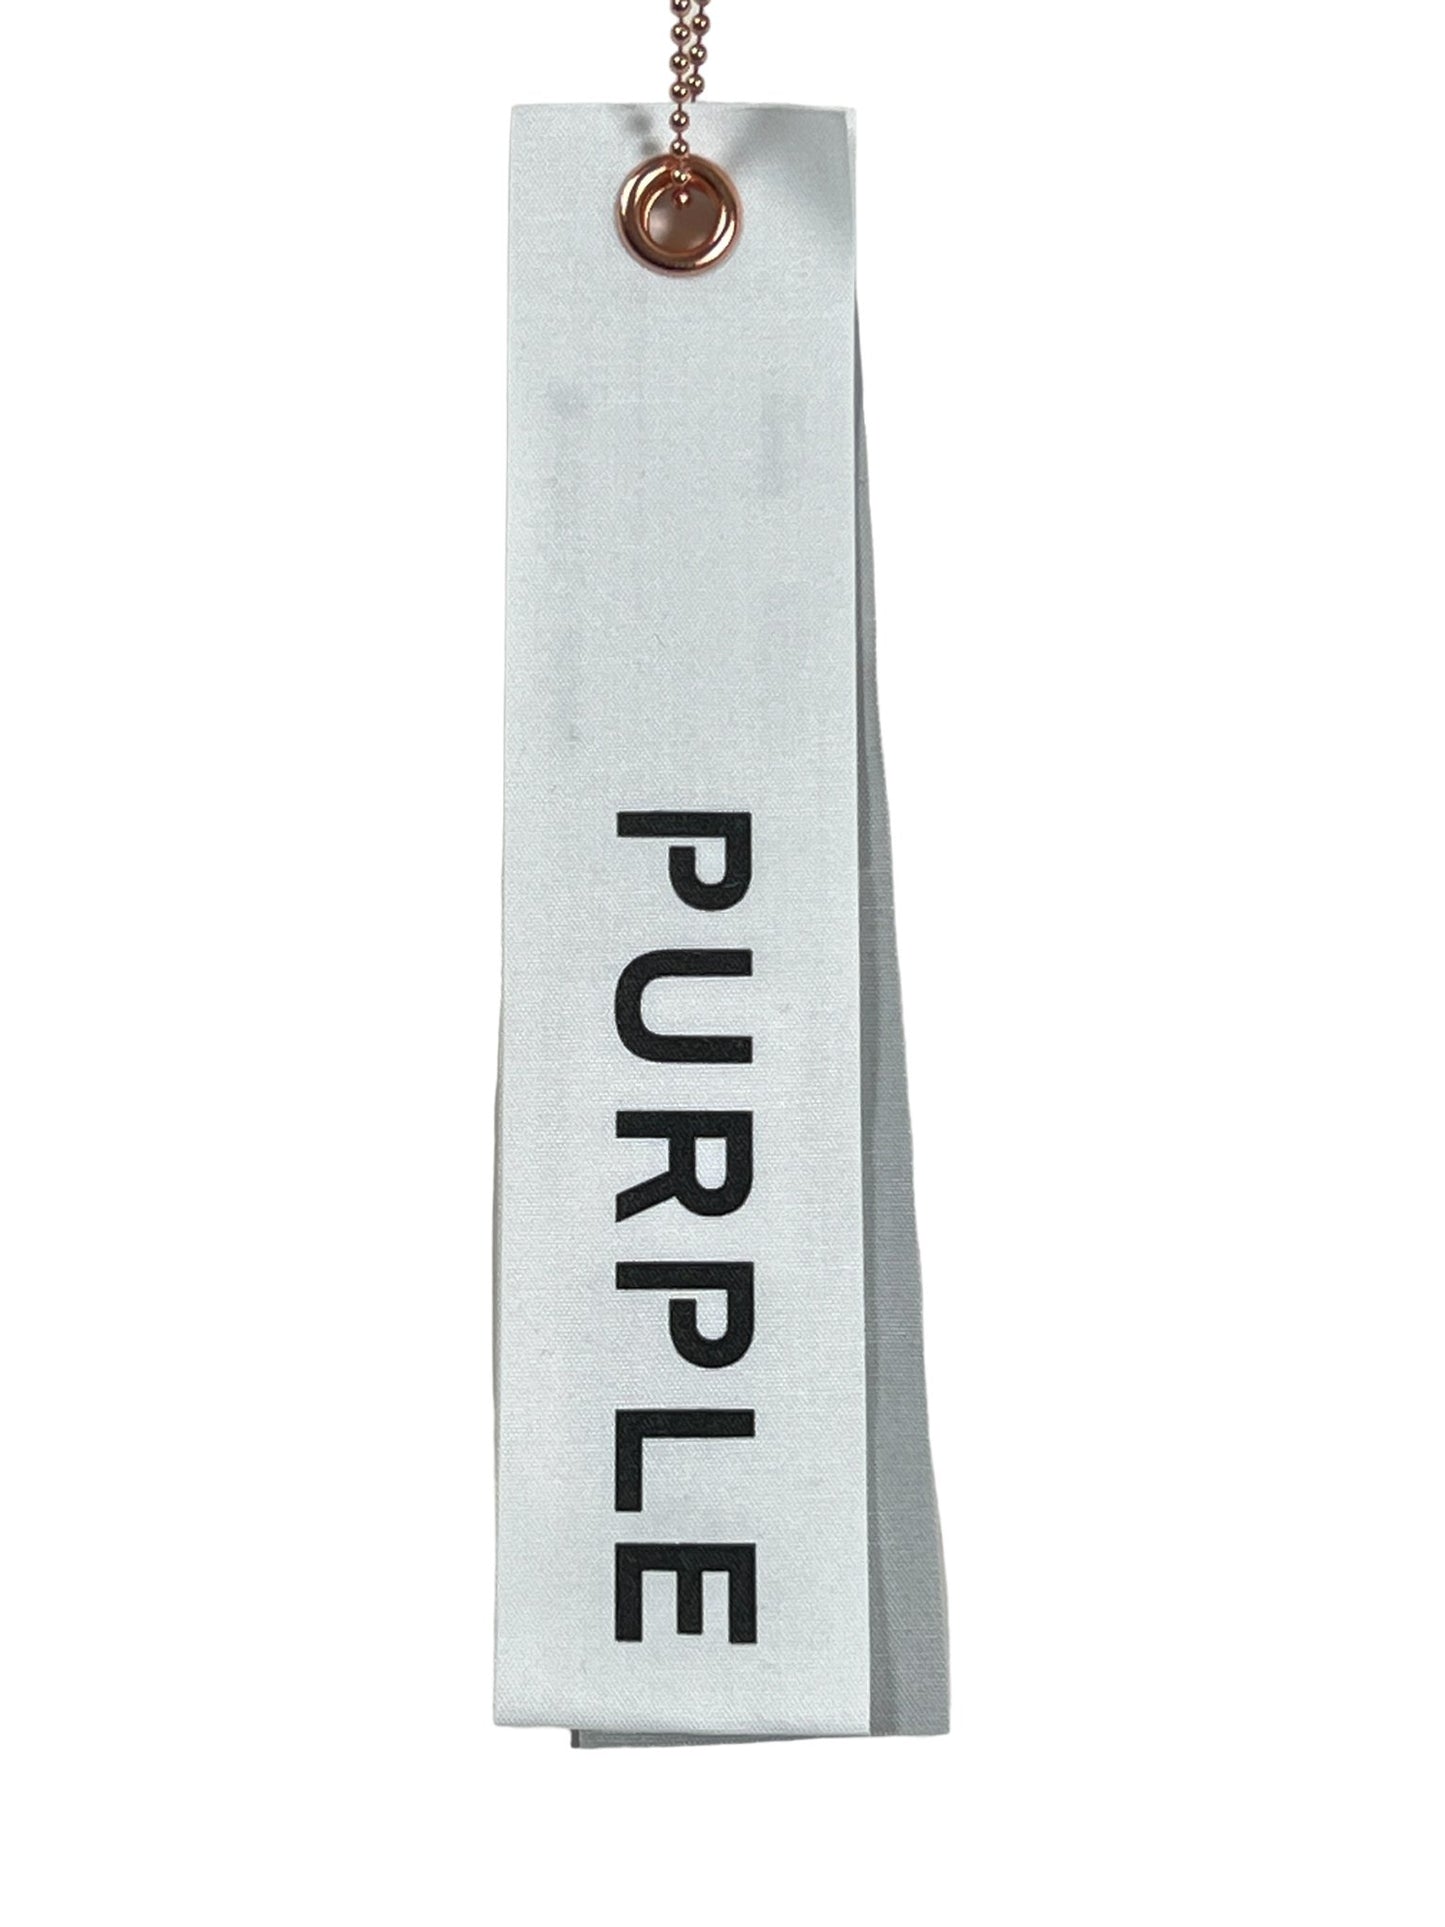 A light gray fabric swatch labeled "PURPLE" in black text, attached to a chain through a metal grommet, reminiscent of the quality found in PURPLE BRAND P479-MFBW MWT FLEECE SWEATSHORT BLACK by PURPLE BRAND.